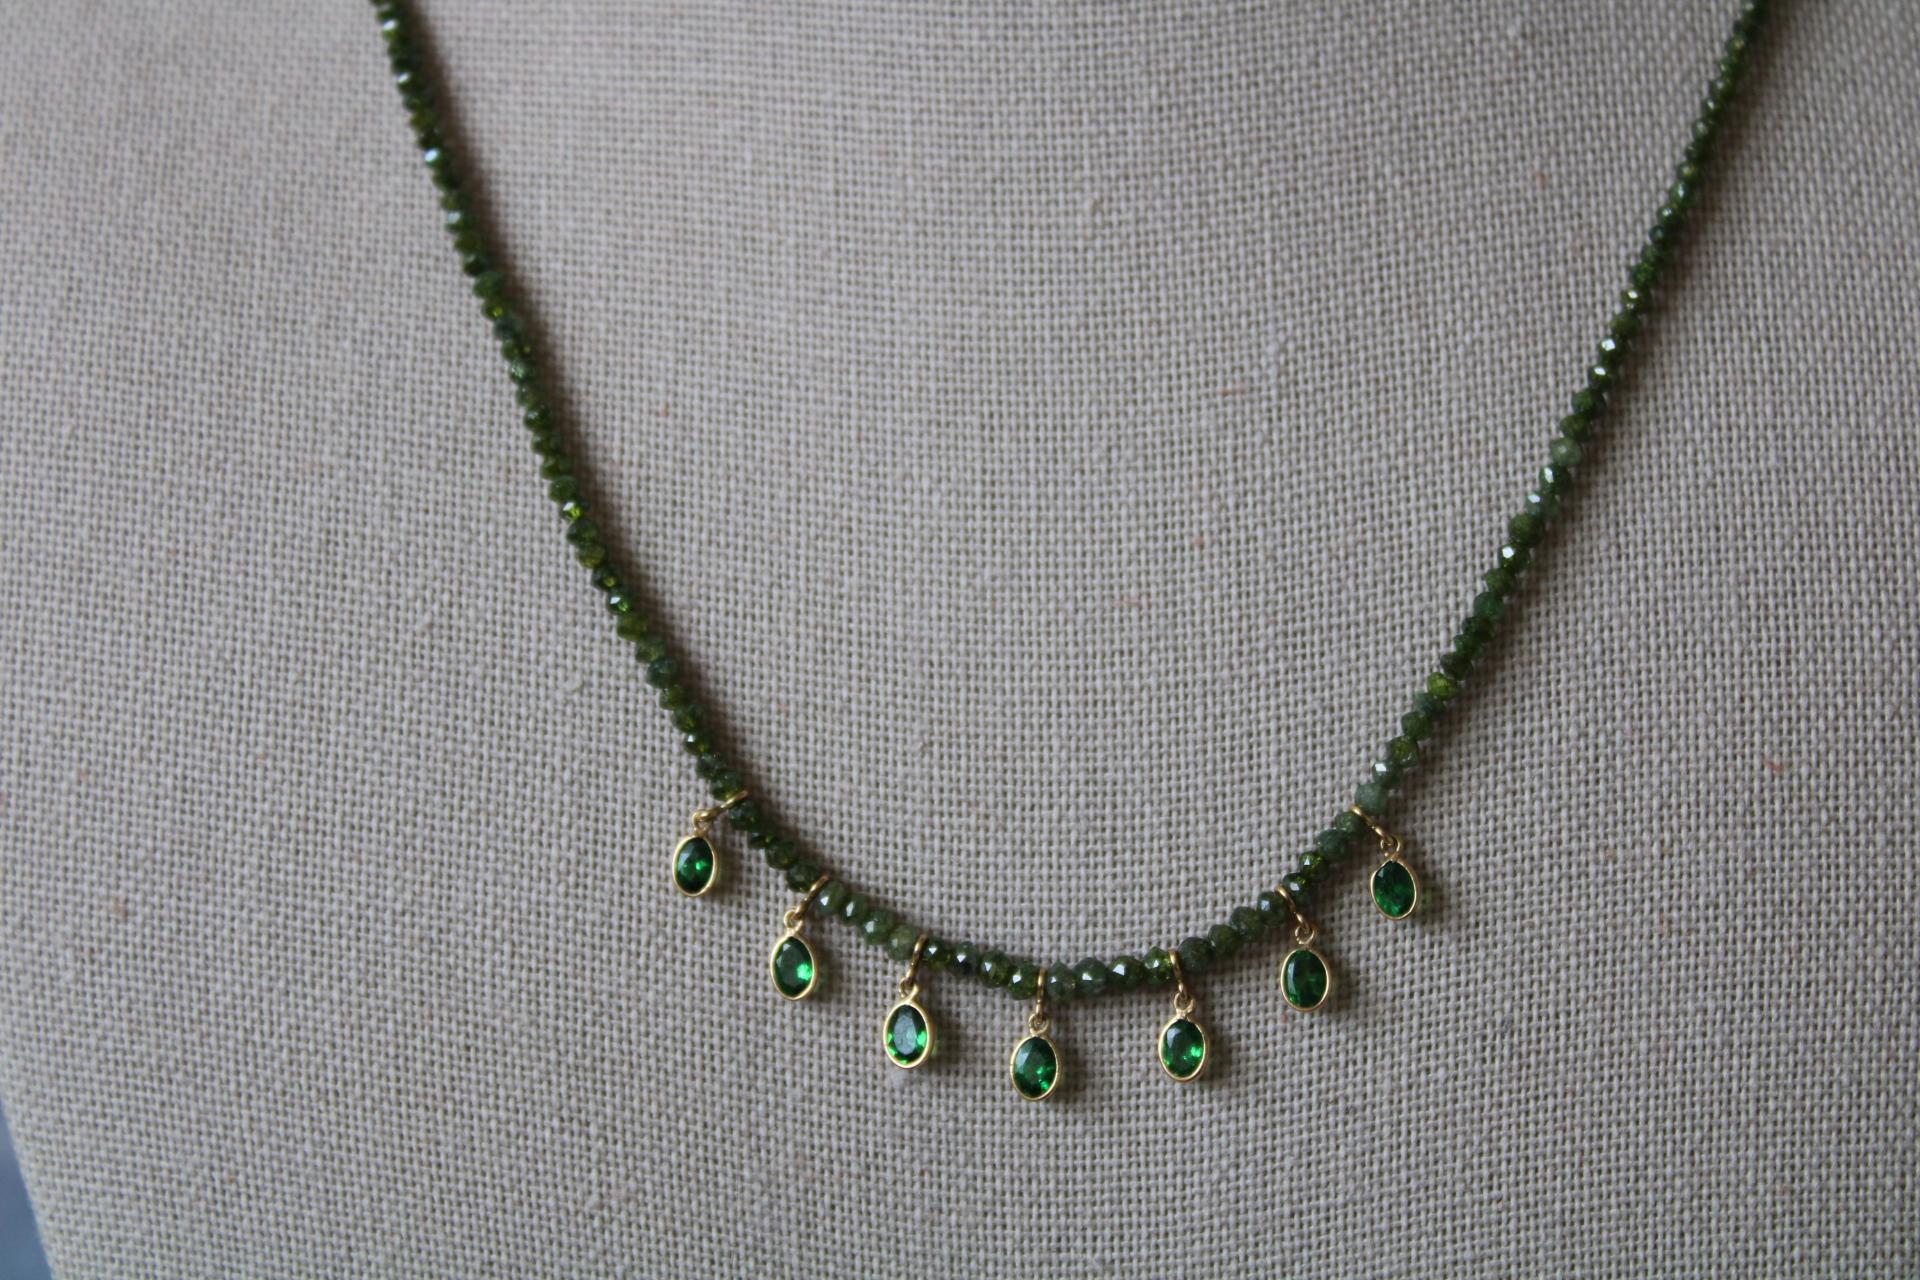 Modern 17.22 Carat Diamond Bead Chain in 18K Gold with Tsavorite Pears For Sale